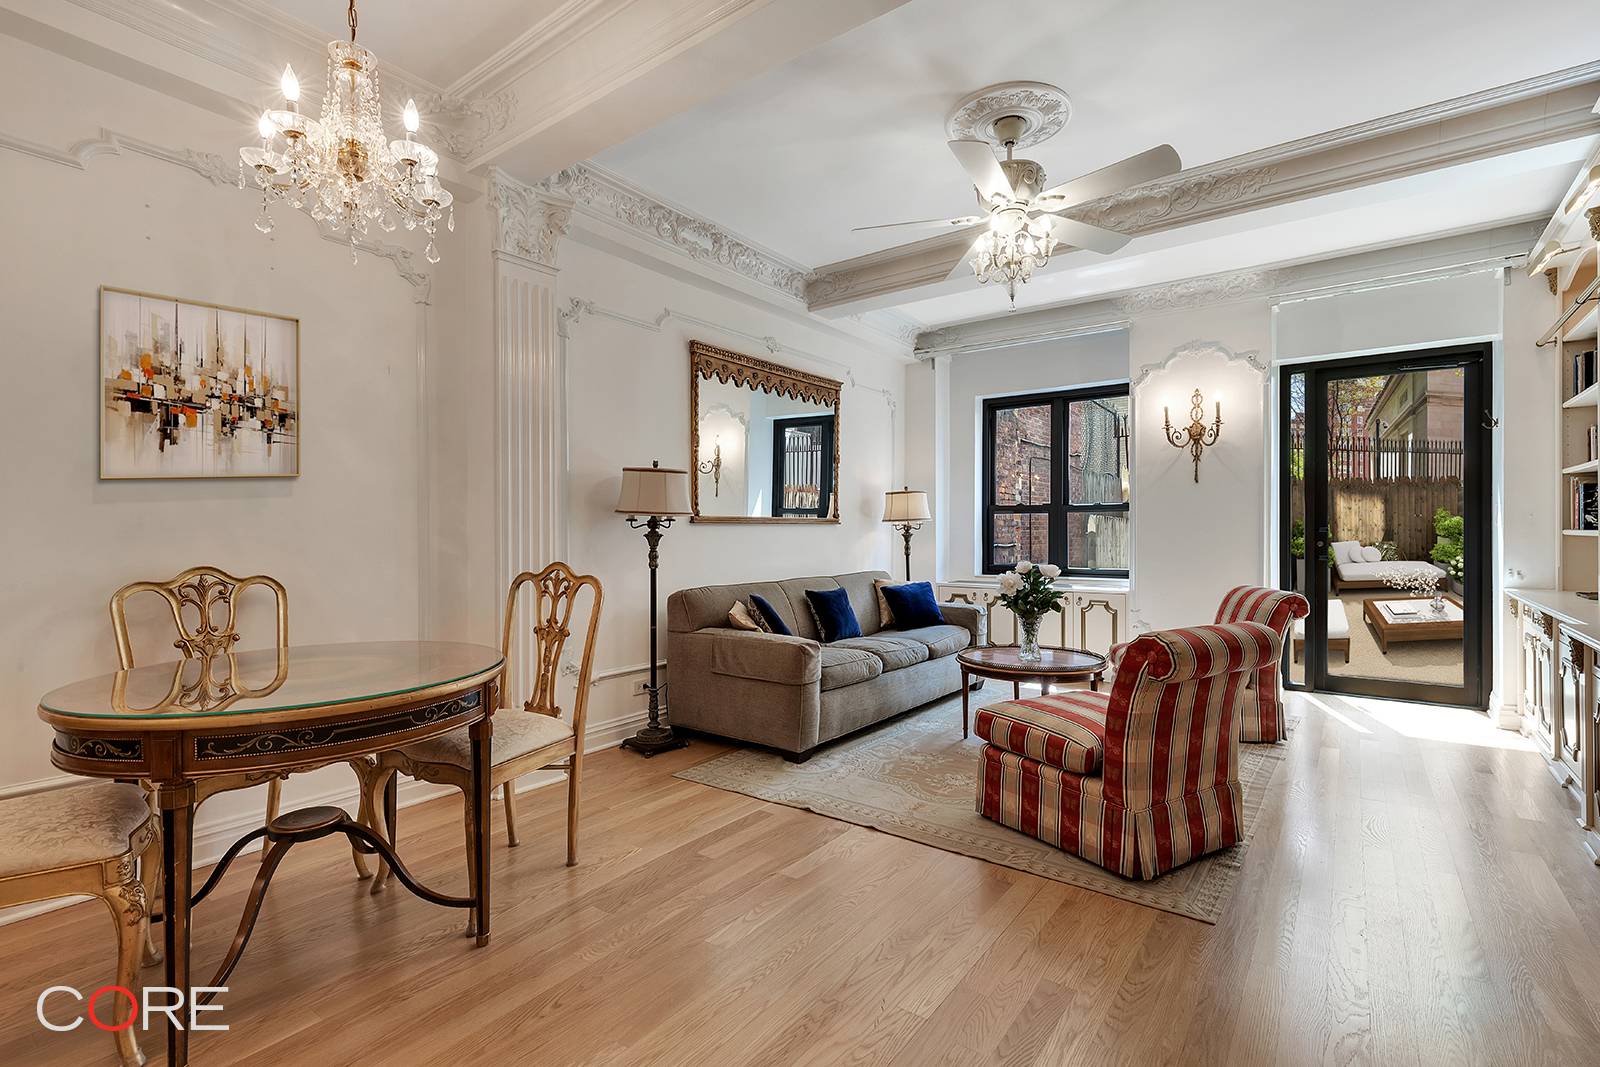 Welcome to this gracious two bedroom, two and a half bathroom duplex boasting 200 square feet of private outdoor space that faces south with majestic views of the Empire State ...